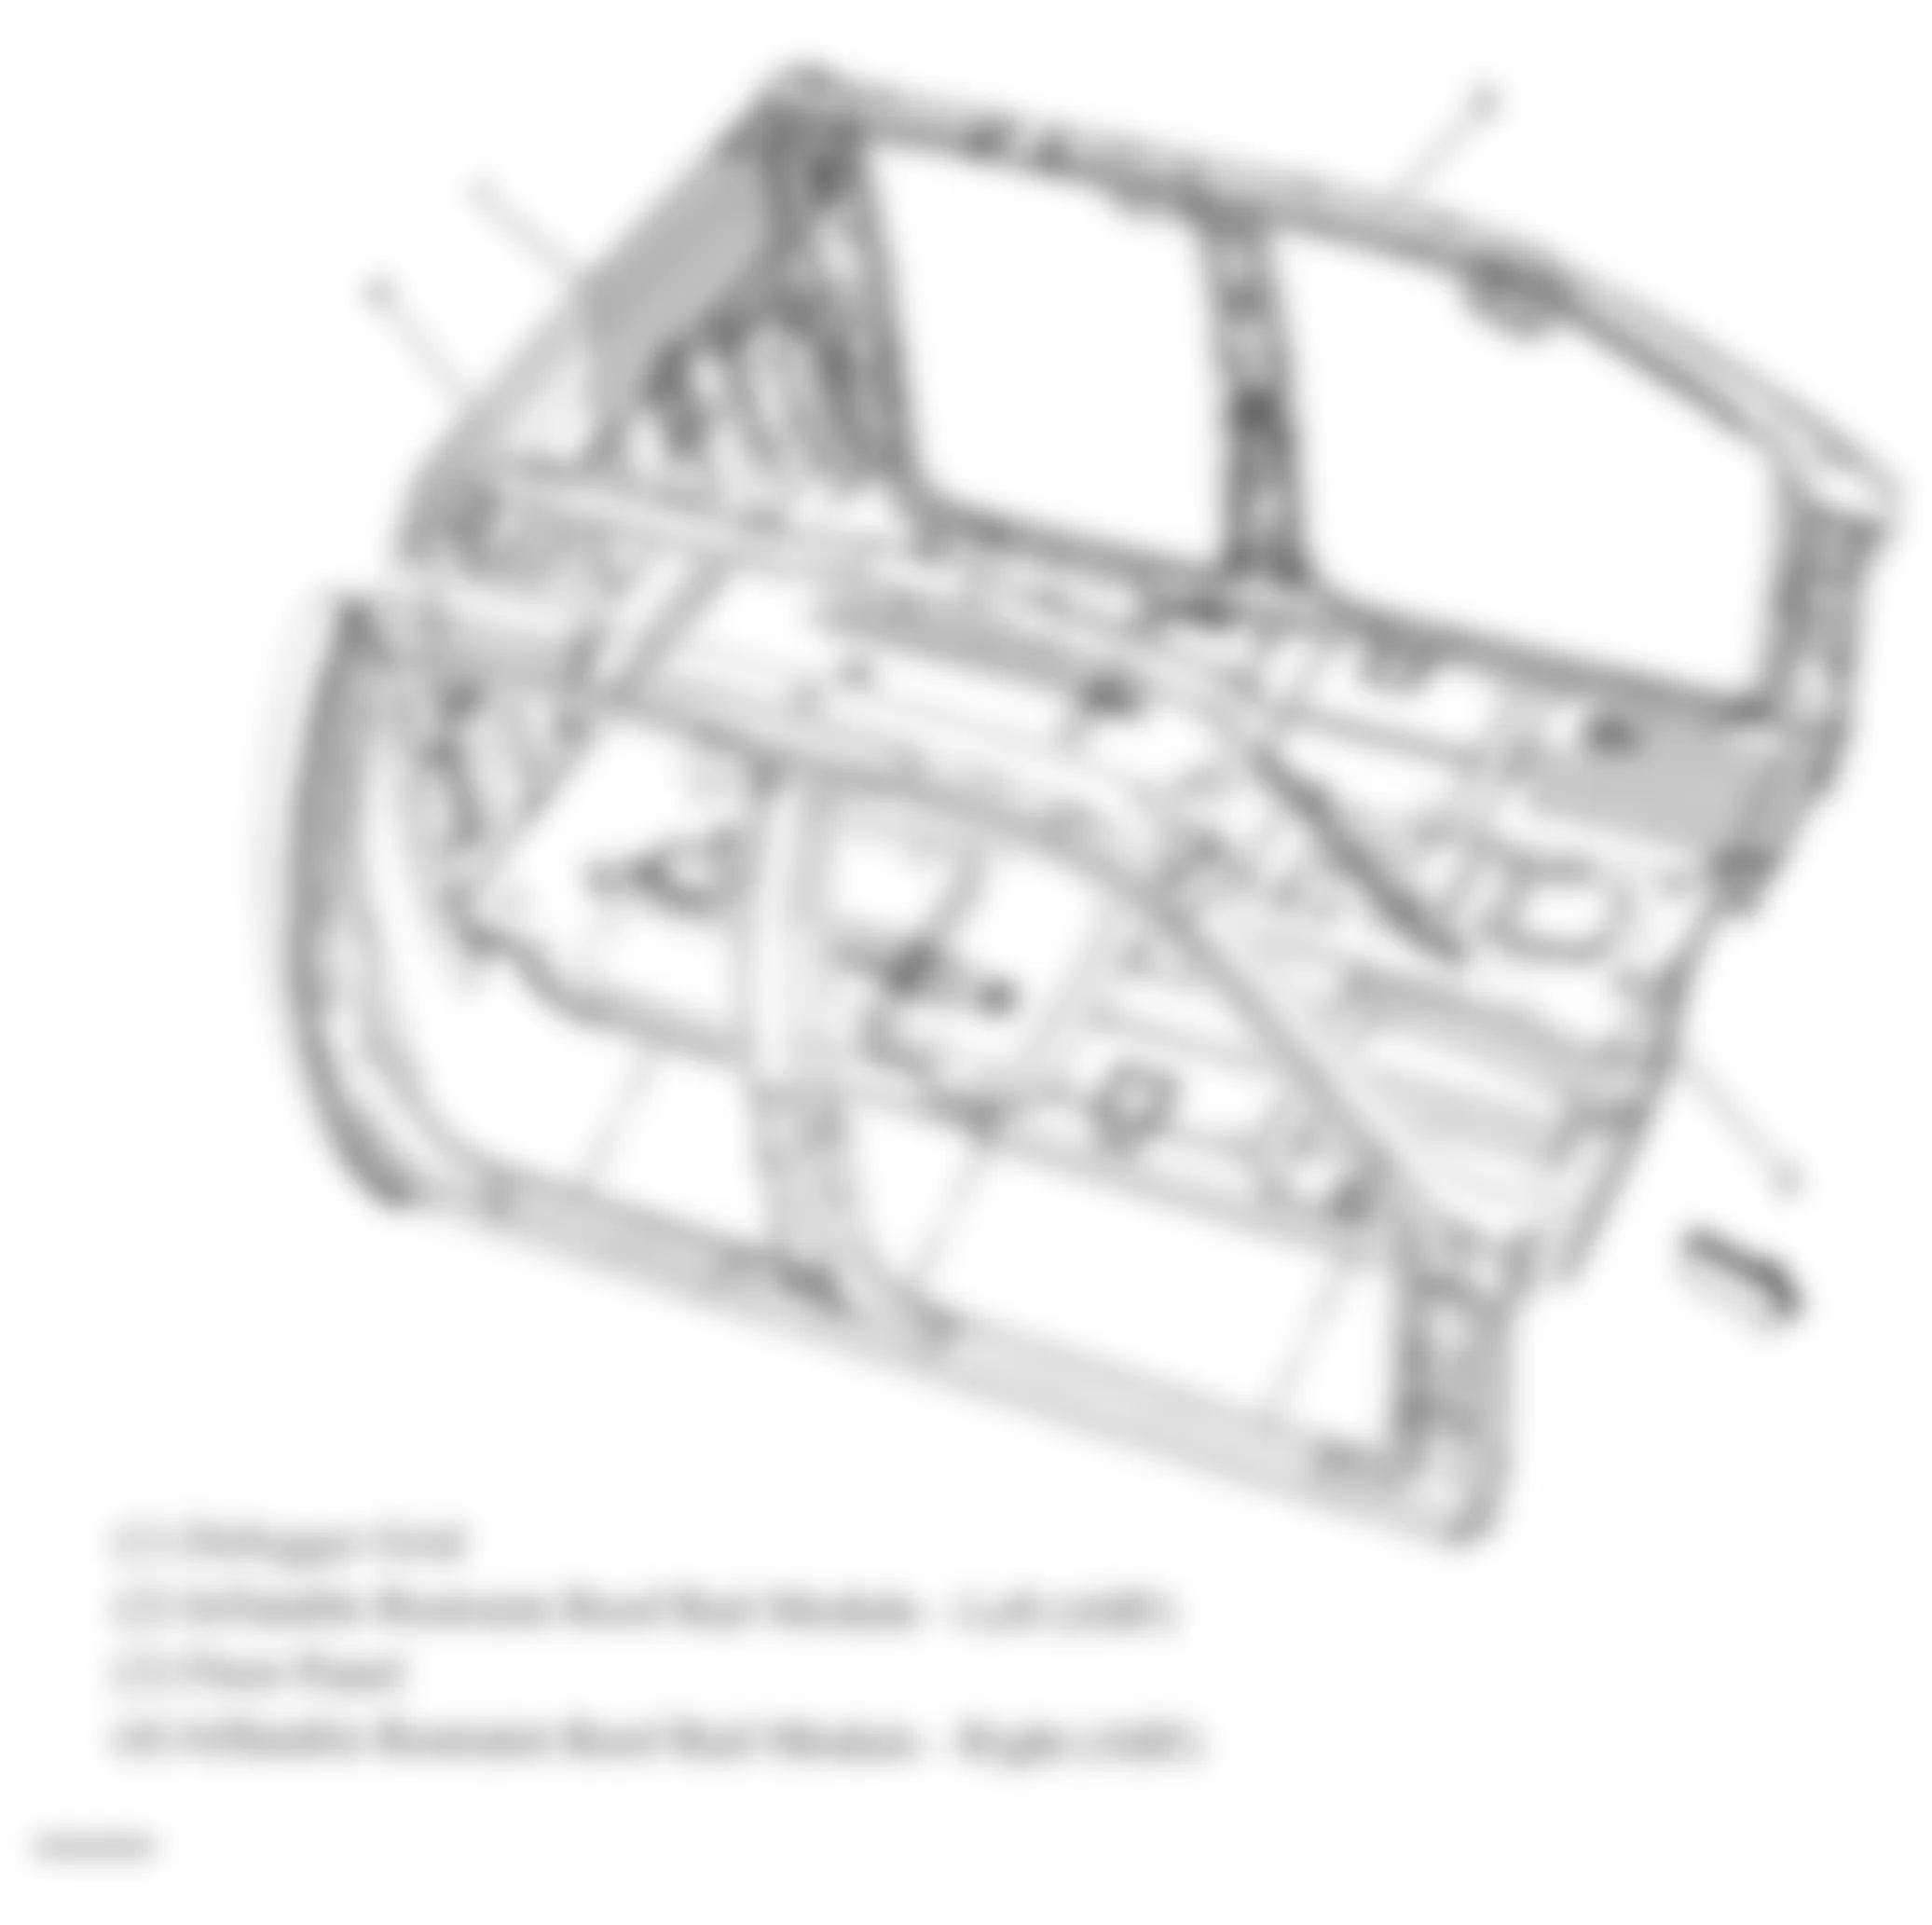 Chevrolet Silverado 2500 HD 2008 - Component Locations -  Roof Rail Air Bags (Extended Cab & Crew Cab)